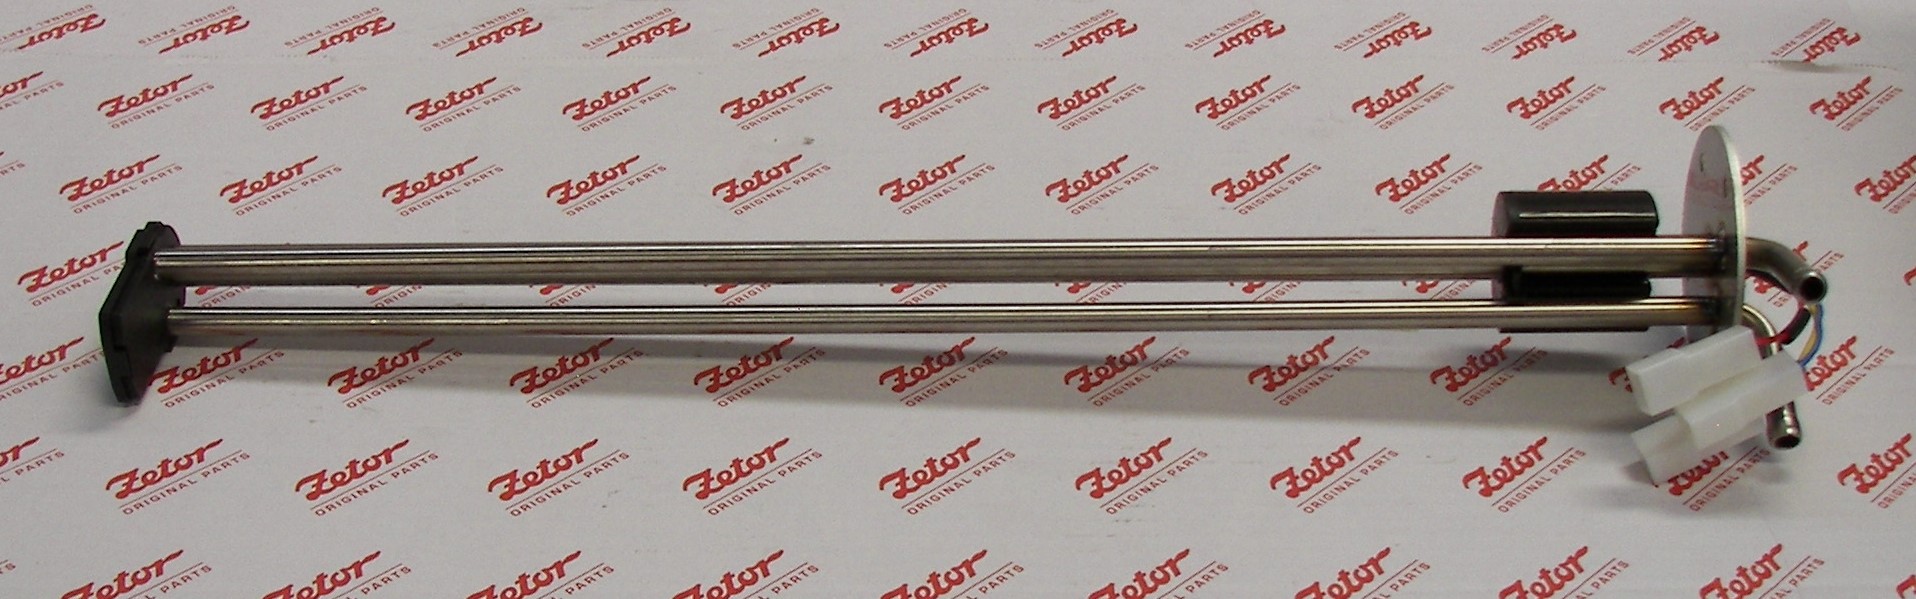 FLOAT, 18-1/2" LONG,  WITH OVAL SEALED CONNECTOR, INCLUDES GASKET